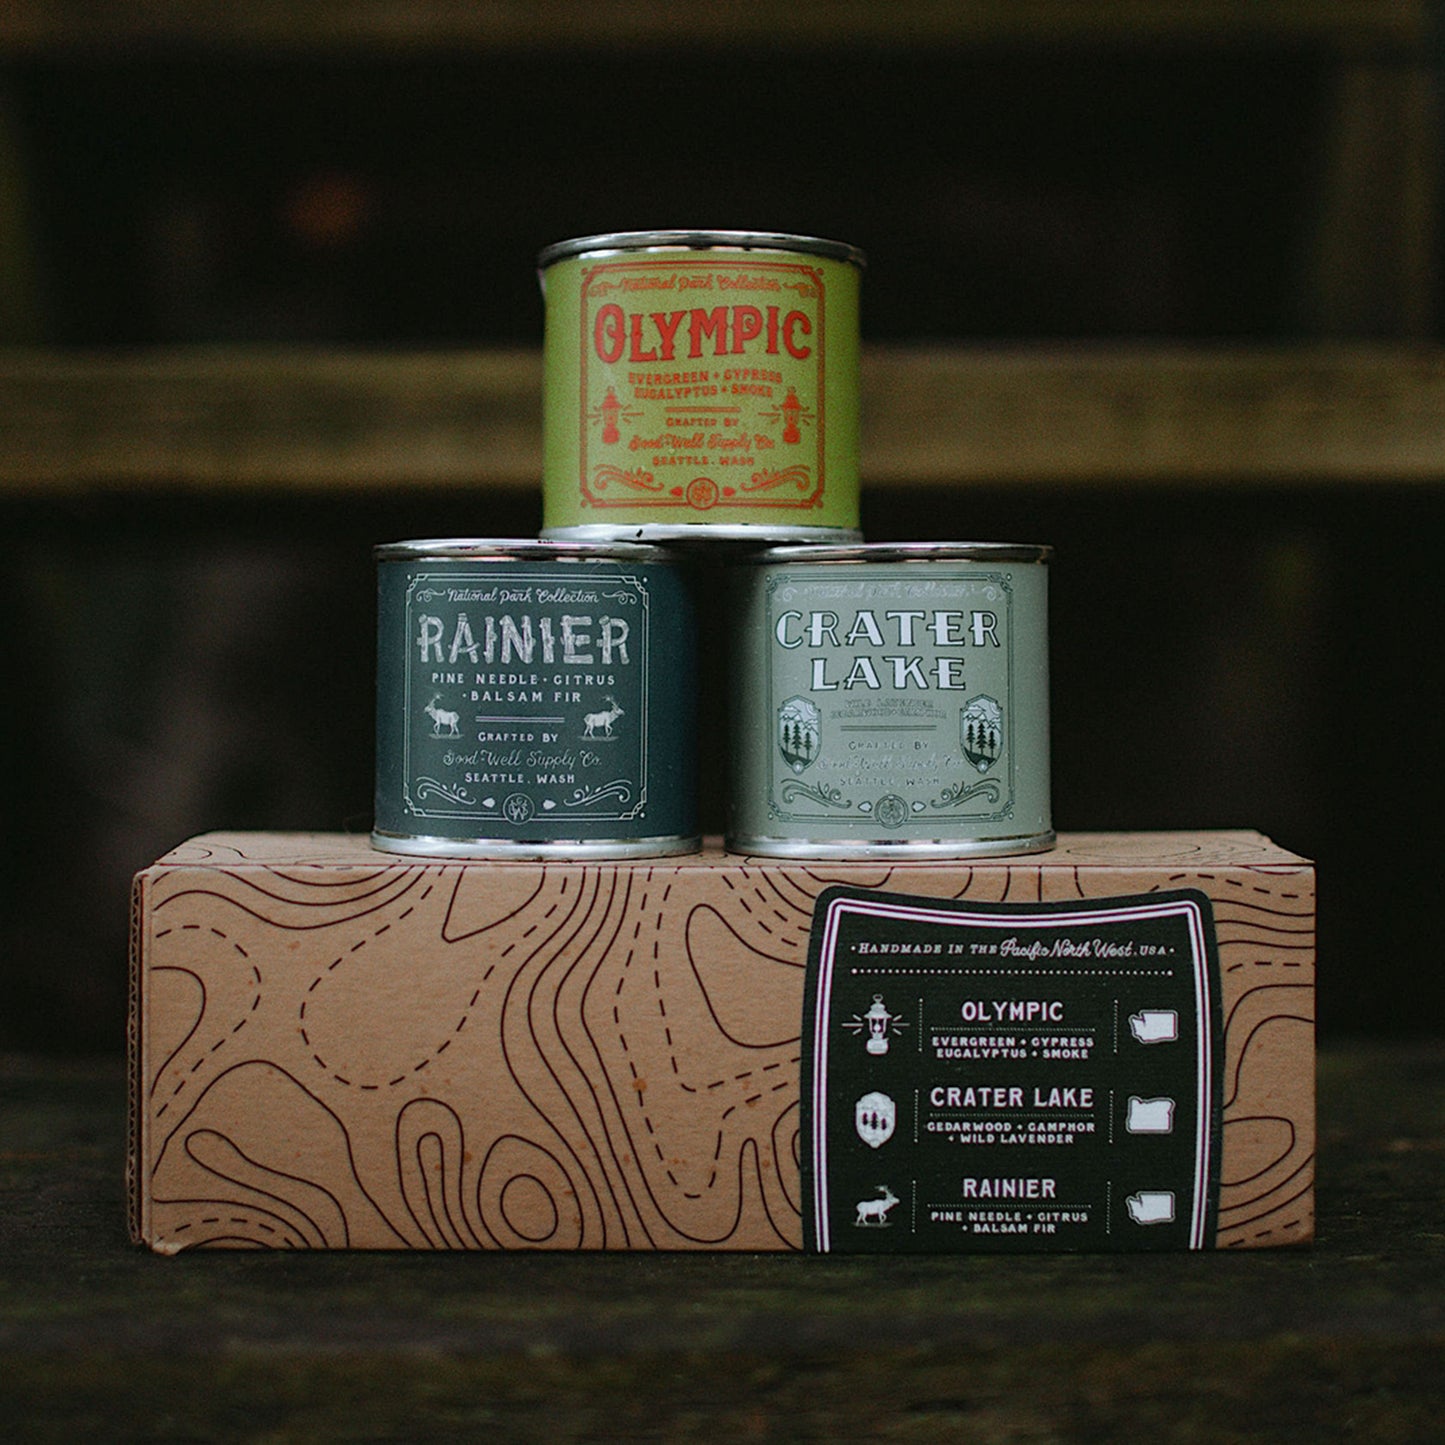 National Parks of the Pacific Northwest Candle Gift Set